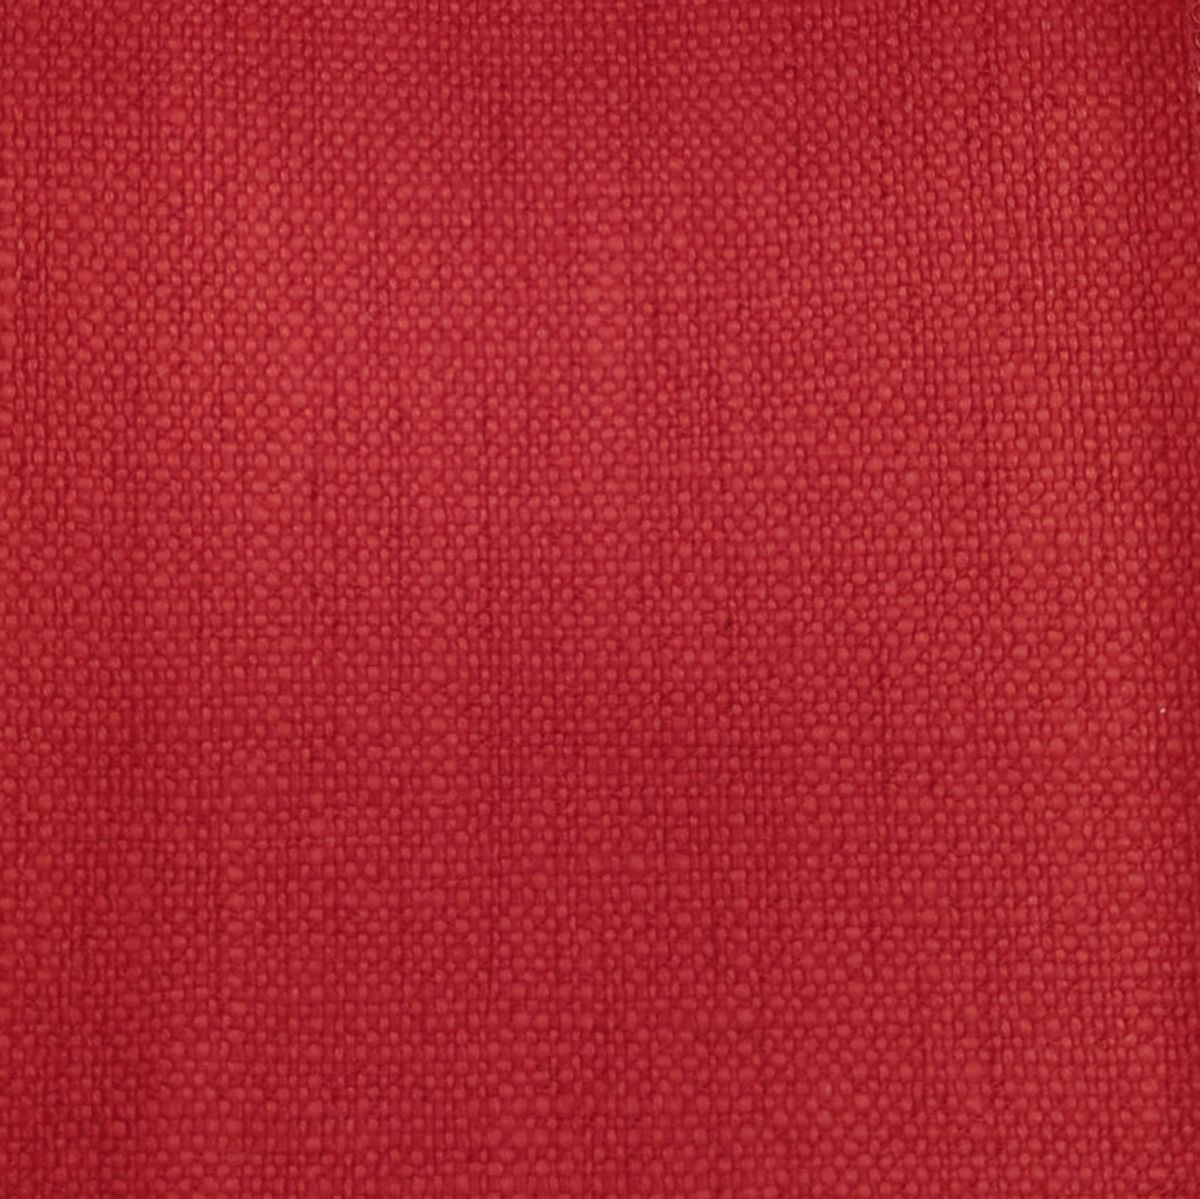 Trento Scarlet Fabric by Voyage Maison